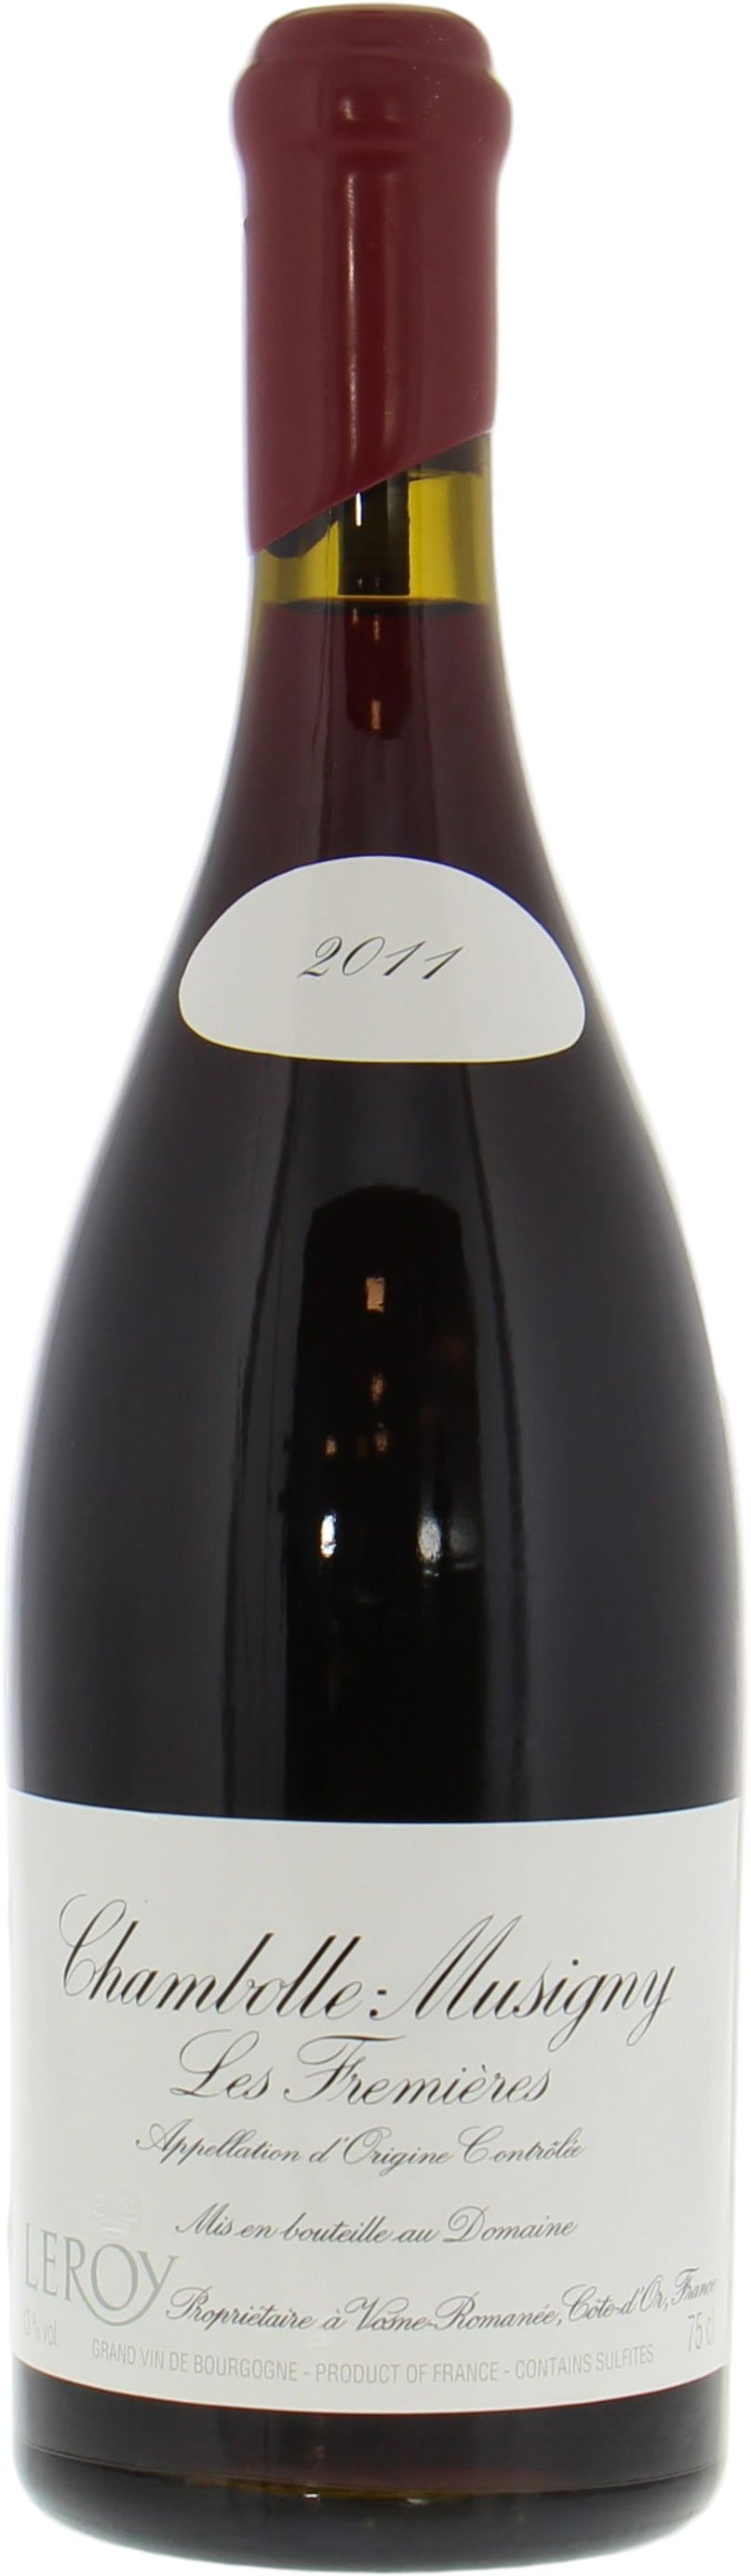 Domaine Leroy - Chambolle Musigny les Fremieres 2011 Perfect